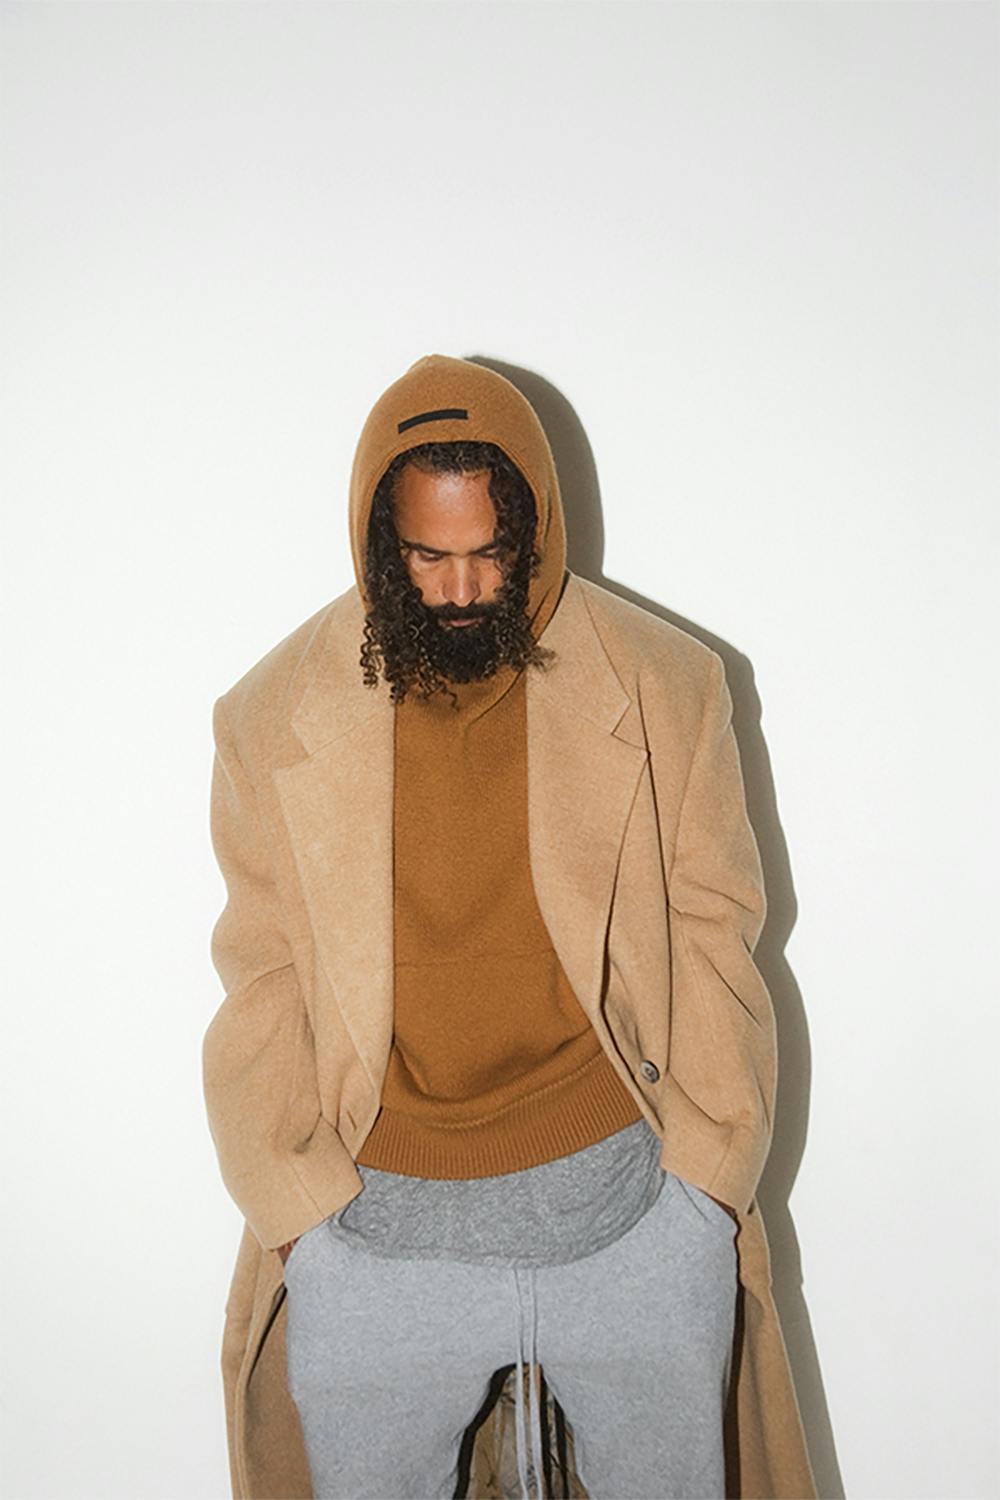 A Look at Jerry Lorenzo's Creative Work Over the Last 8 Years